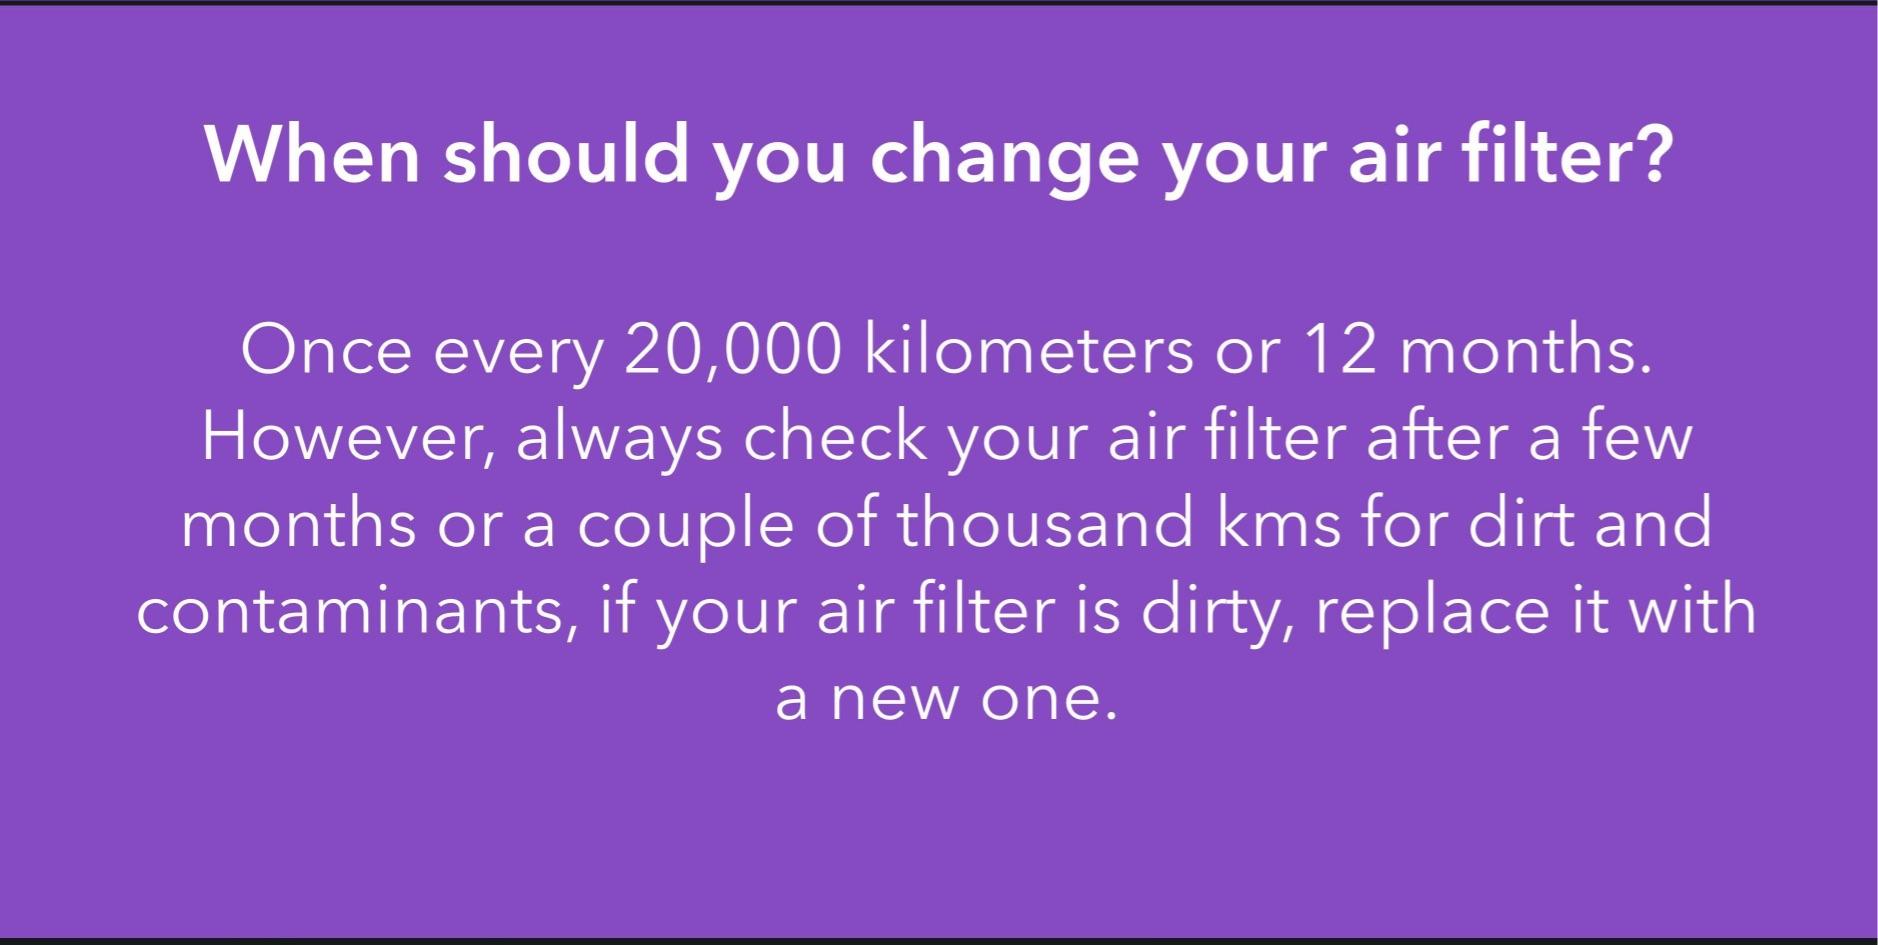 Once every 20,000 kilometers or 12 months. However, always check your air filter after a few months or a couple of thousand kms for dirt and contaminants, if your air filter is dirty, replace it with a new one.